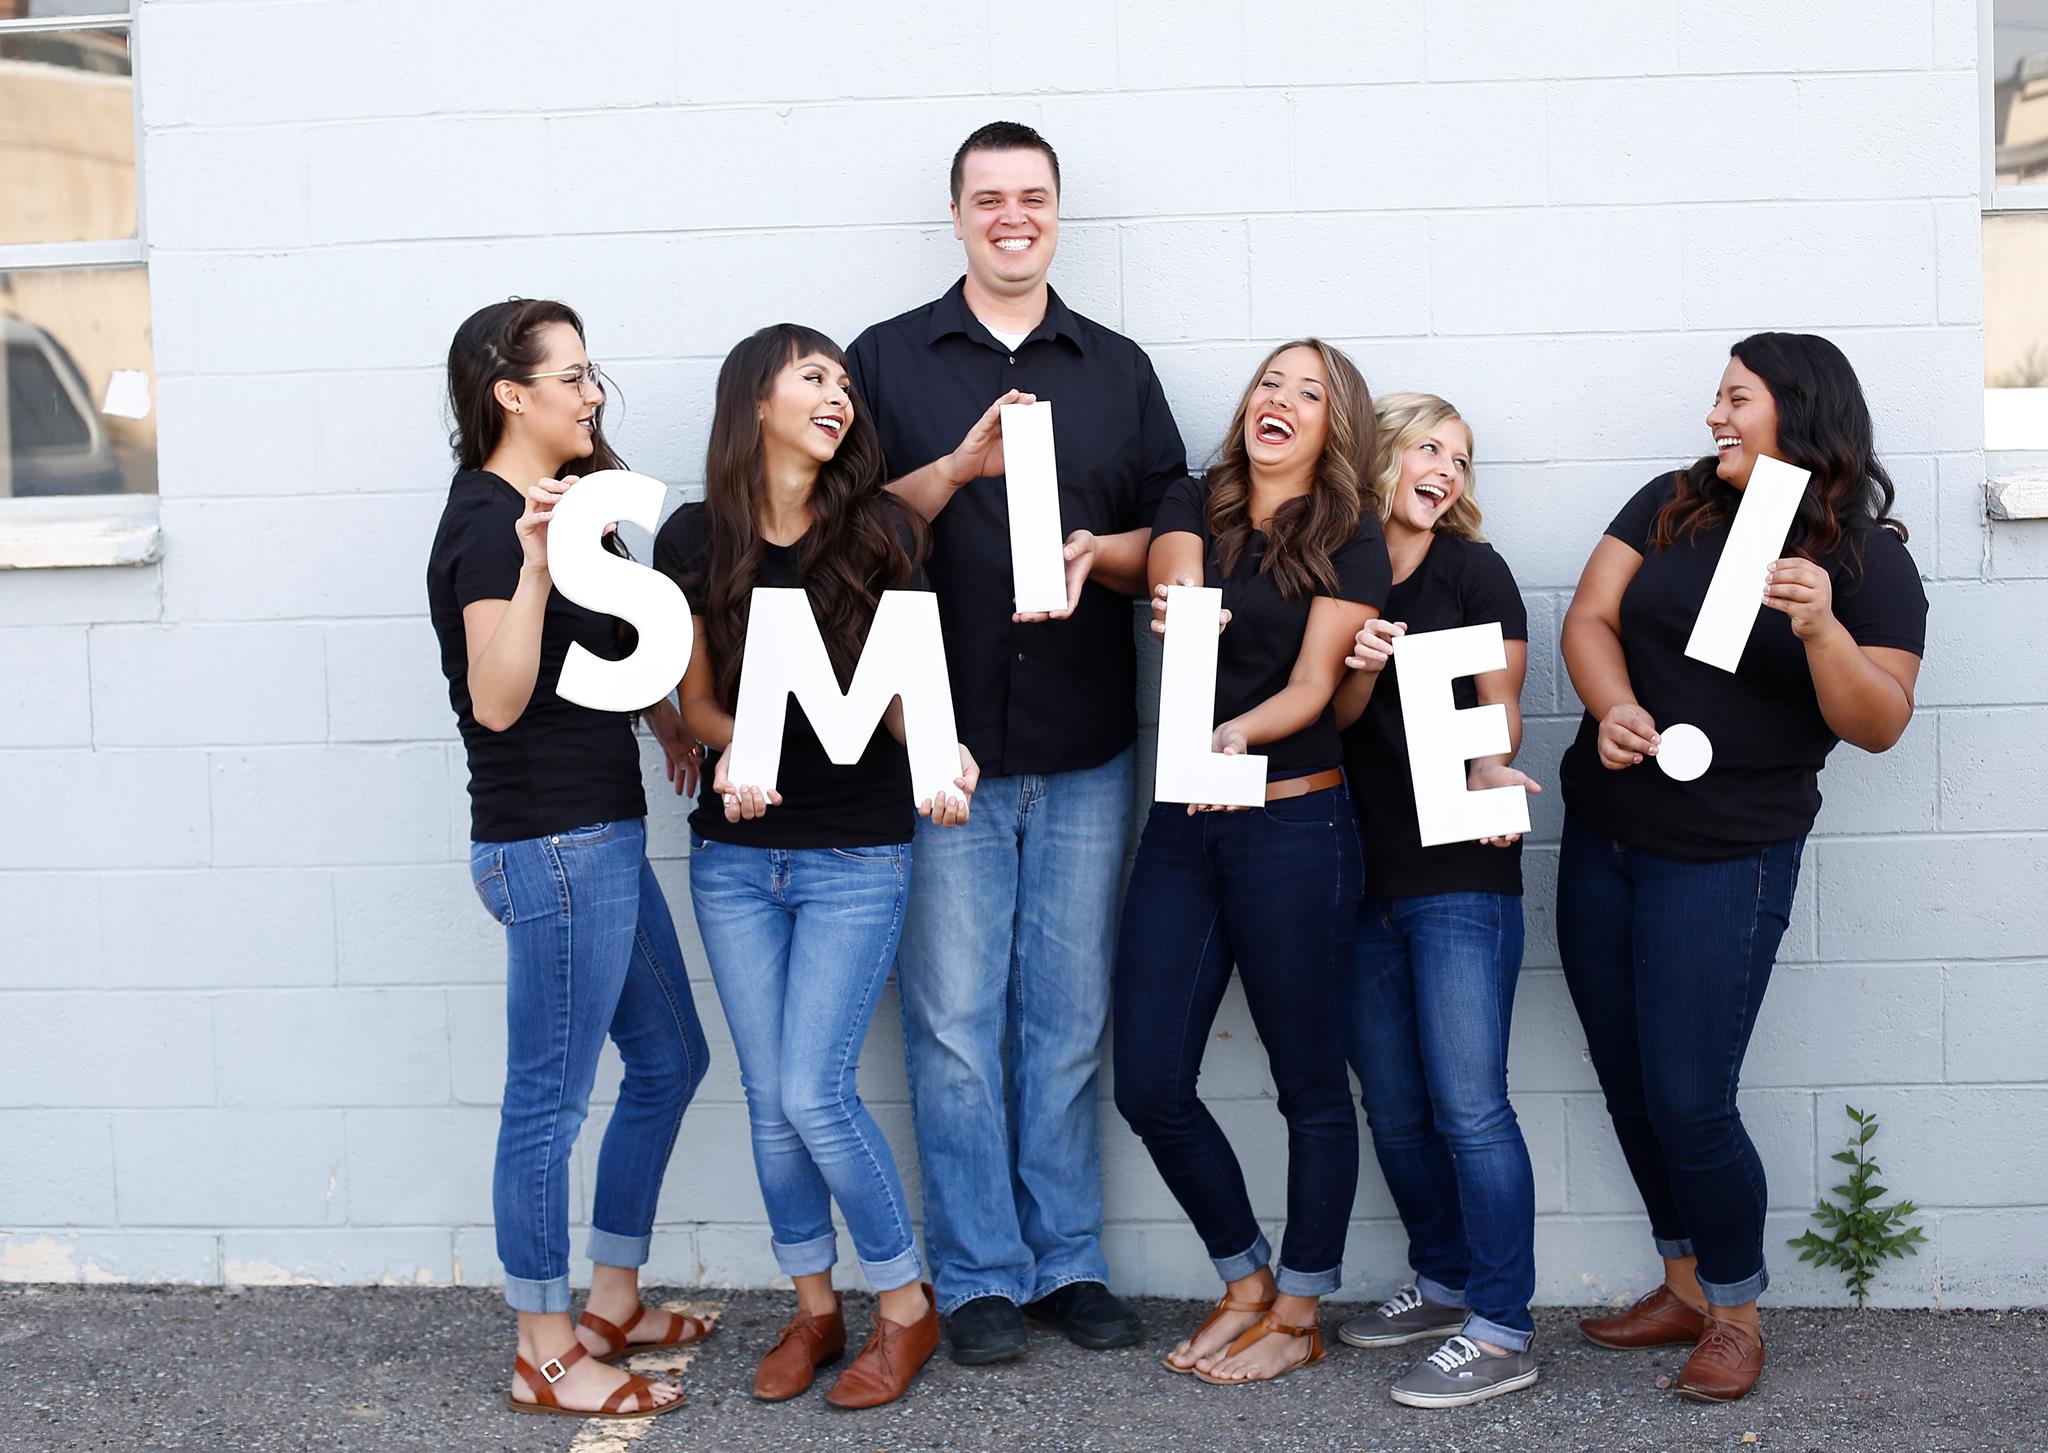 We want to make you SMILE!